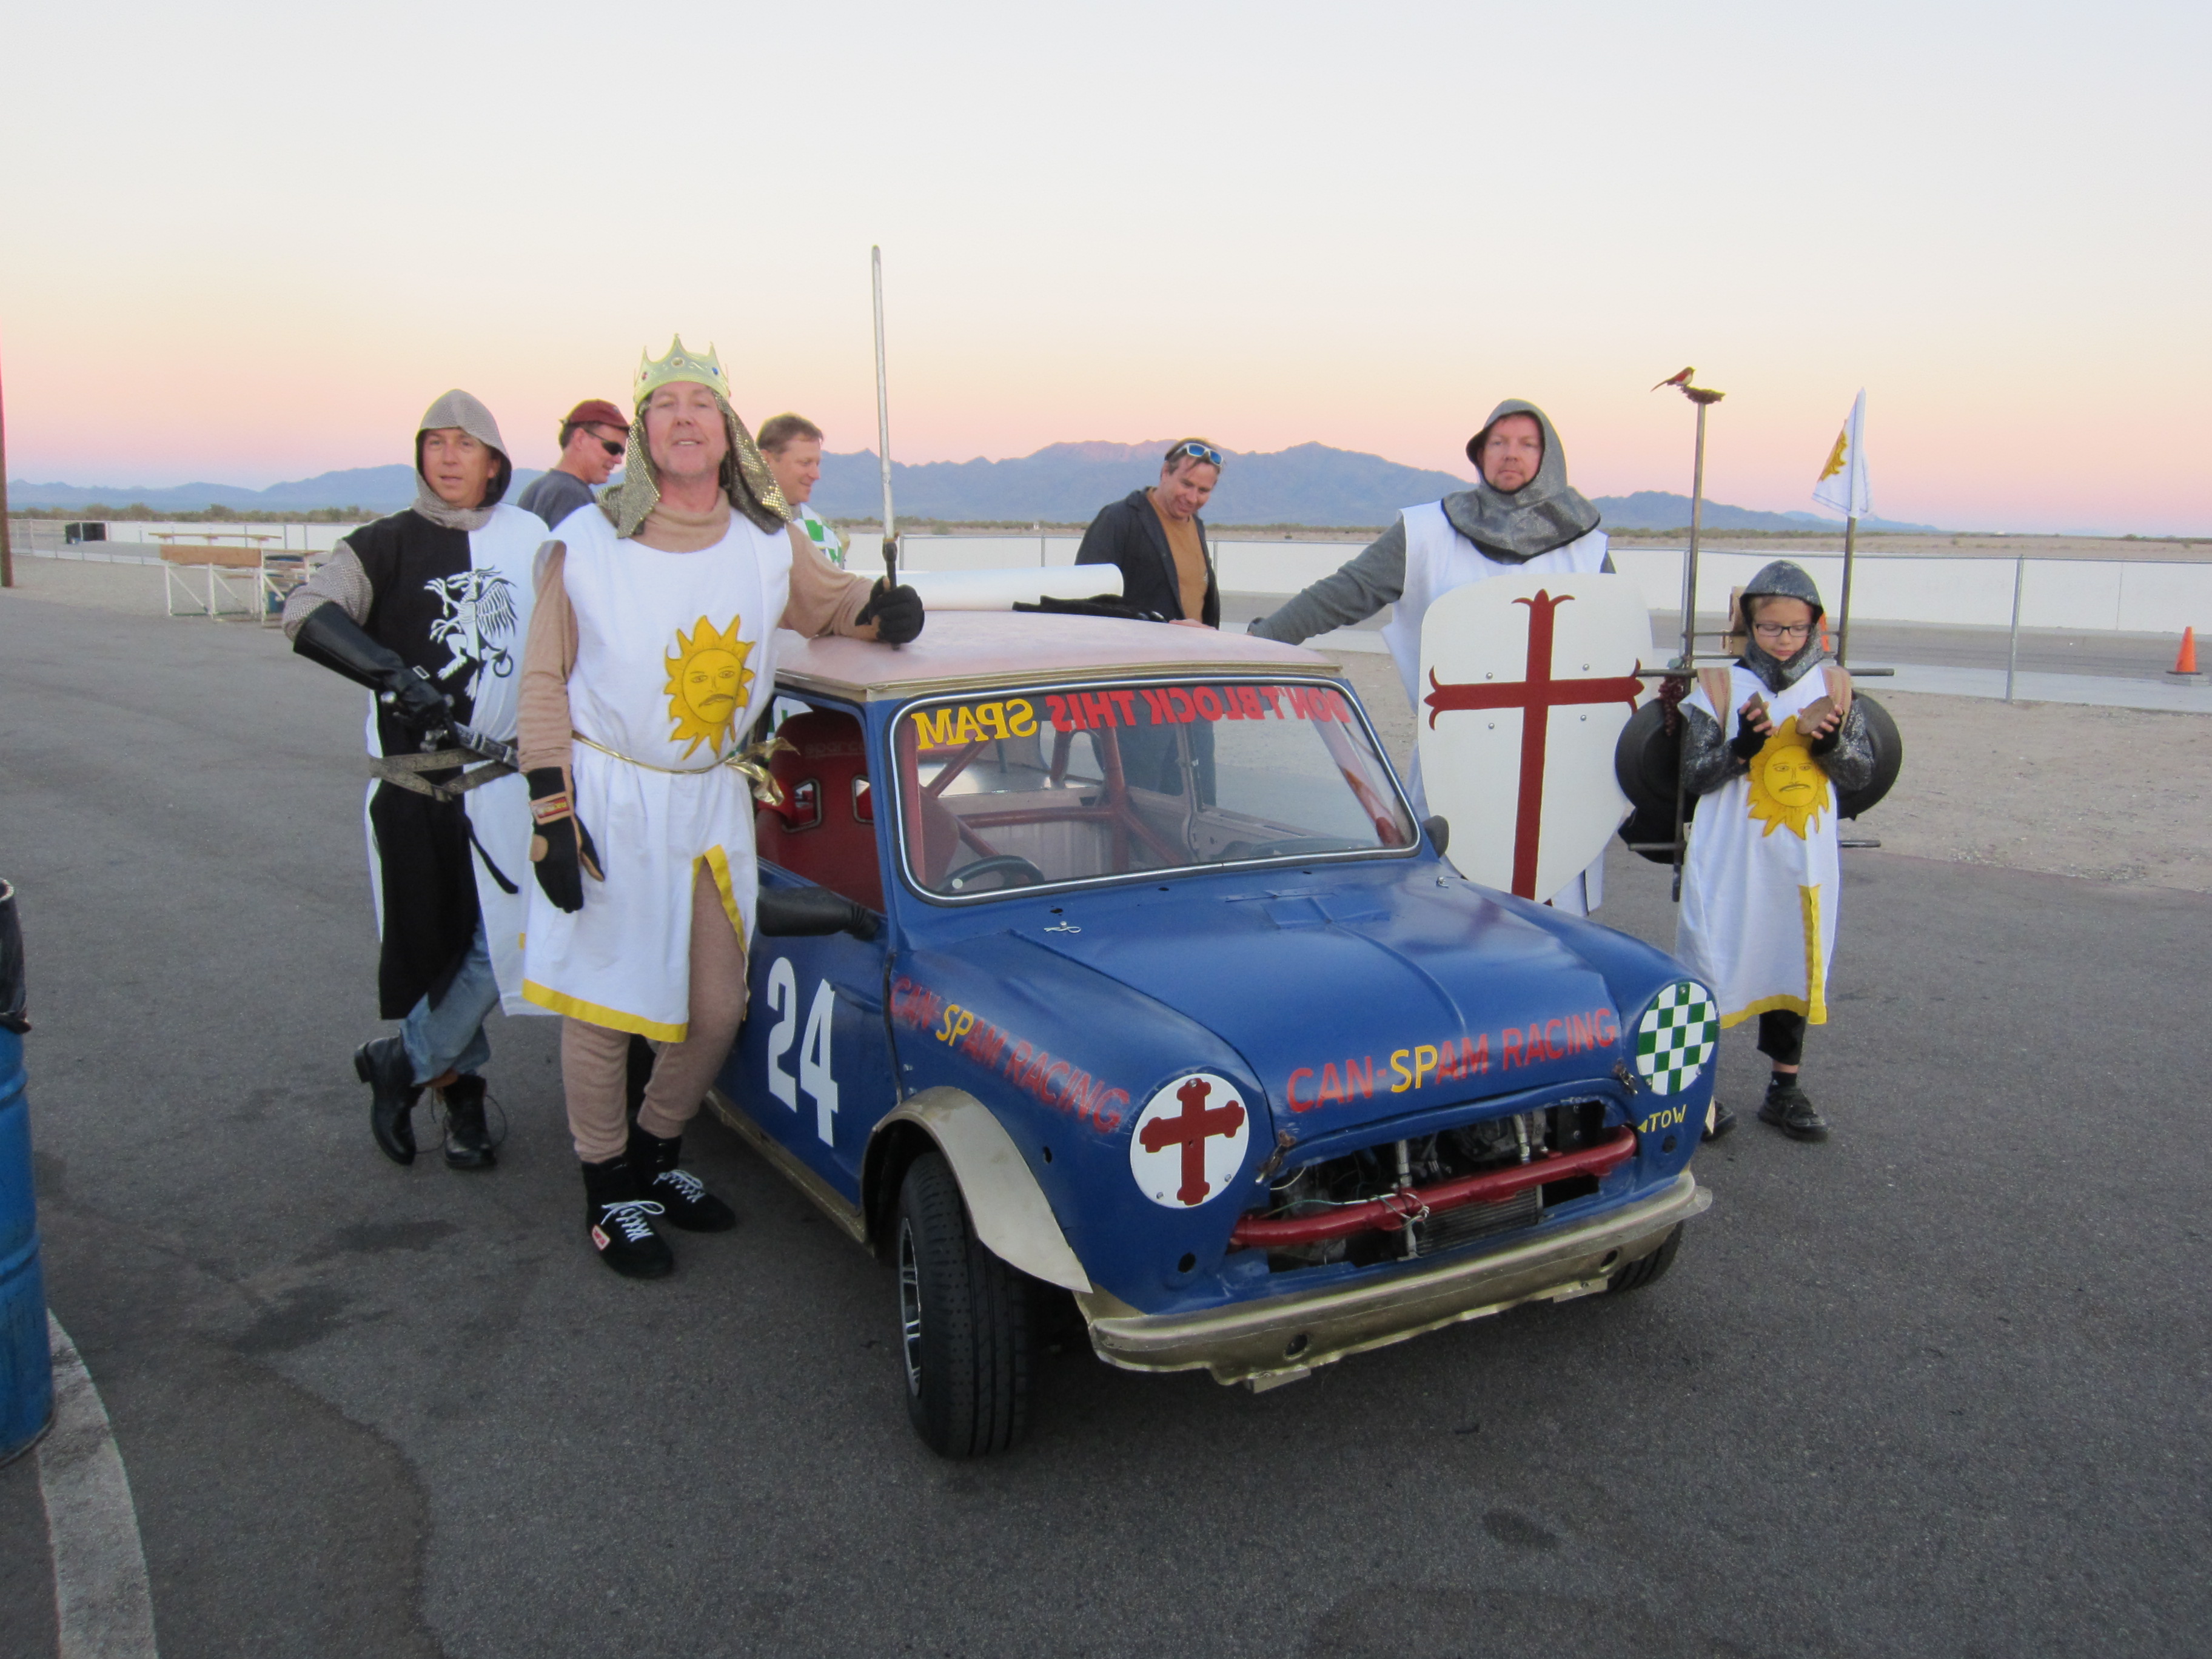 Yes, racers at one recent event gave their Mini a Monty Python Spamalot theme.